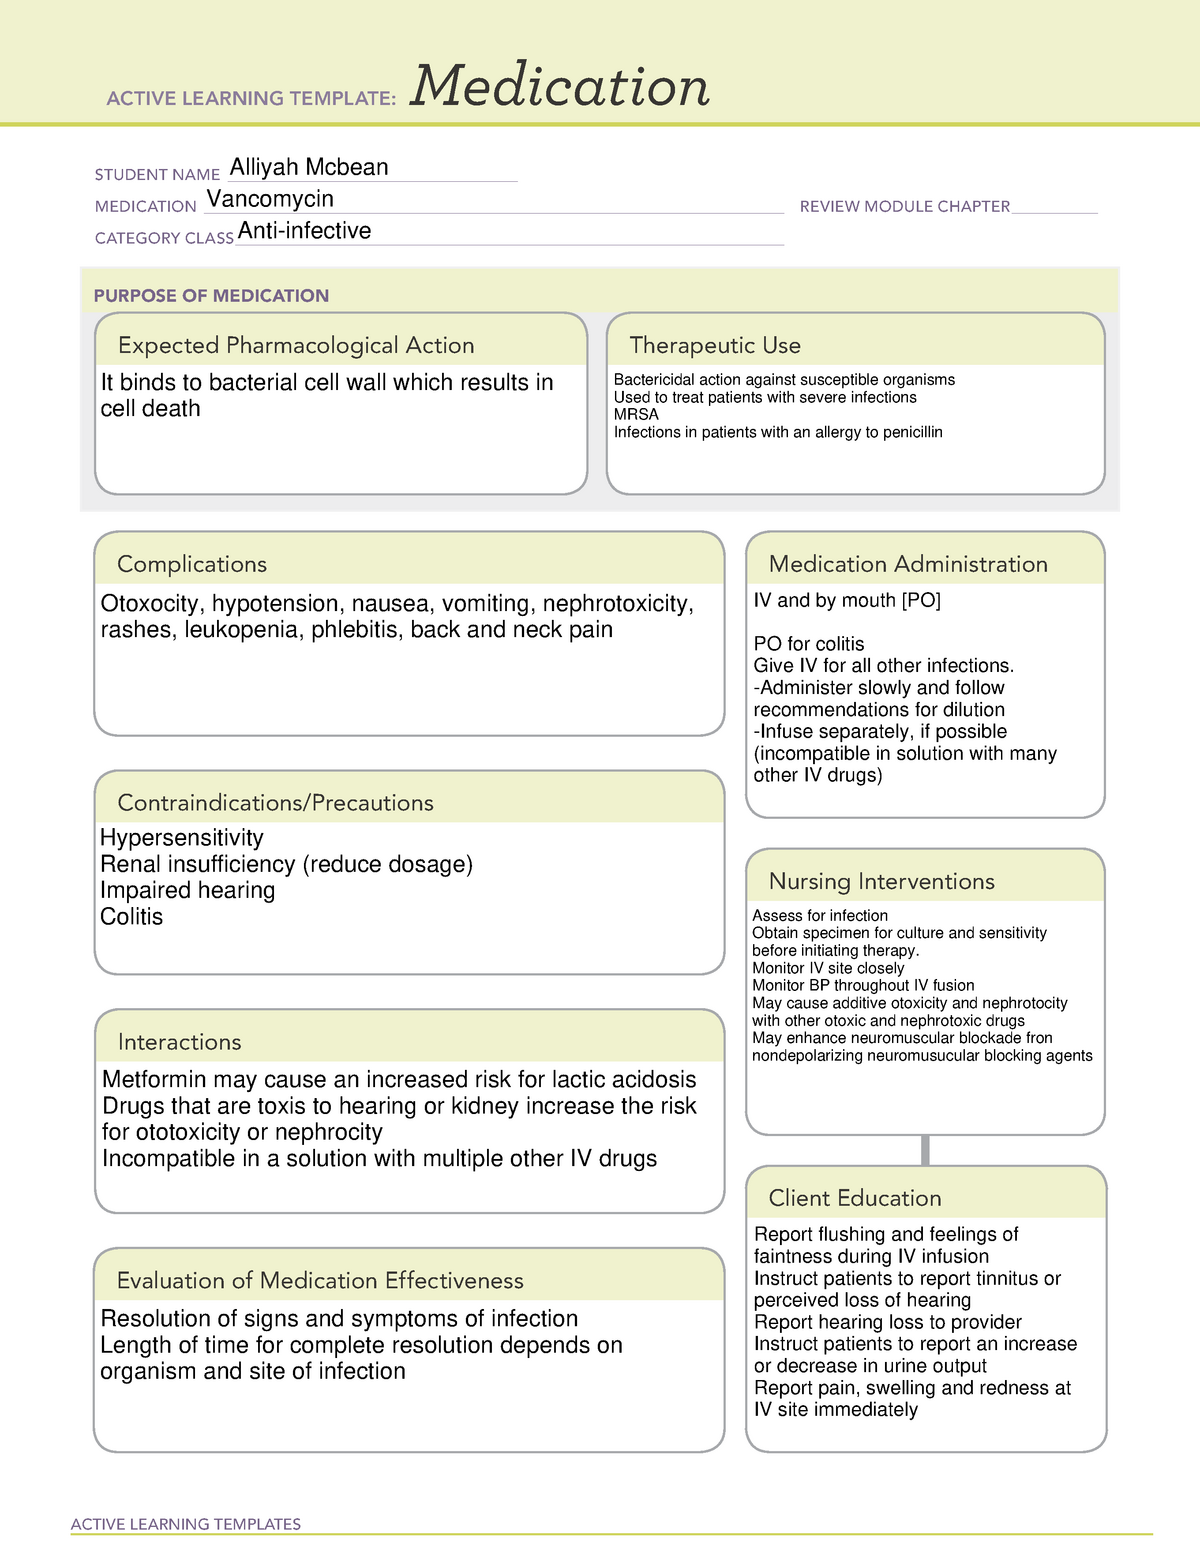 Vancomycin Med Temp ACTIVE LEARNING TEMPLATES Medication STUDENT NAME